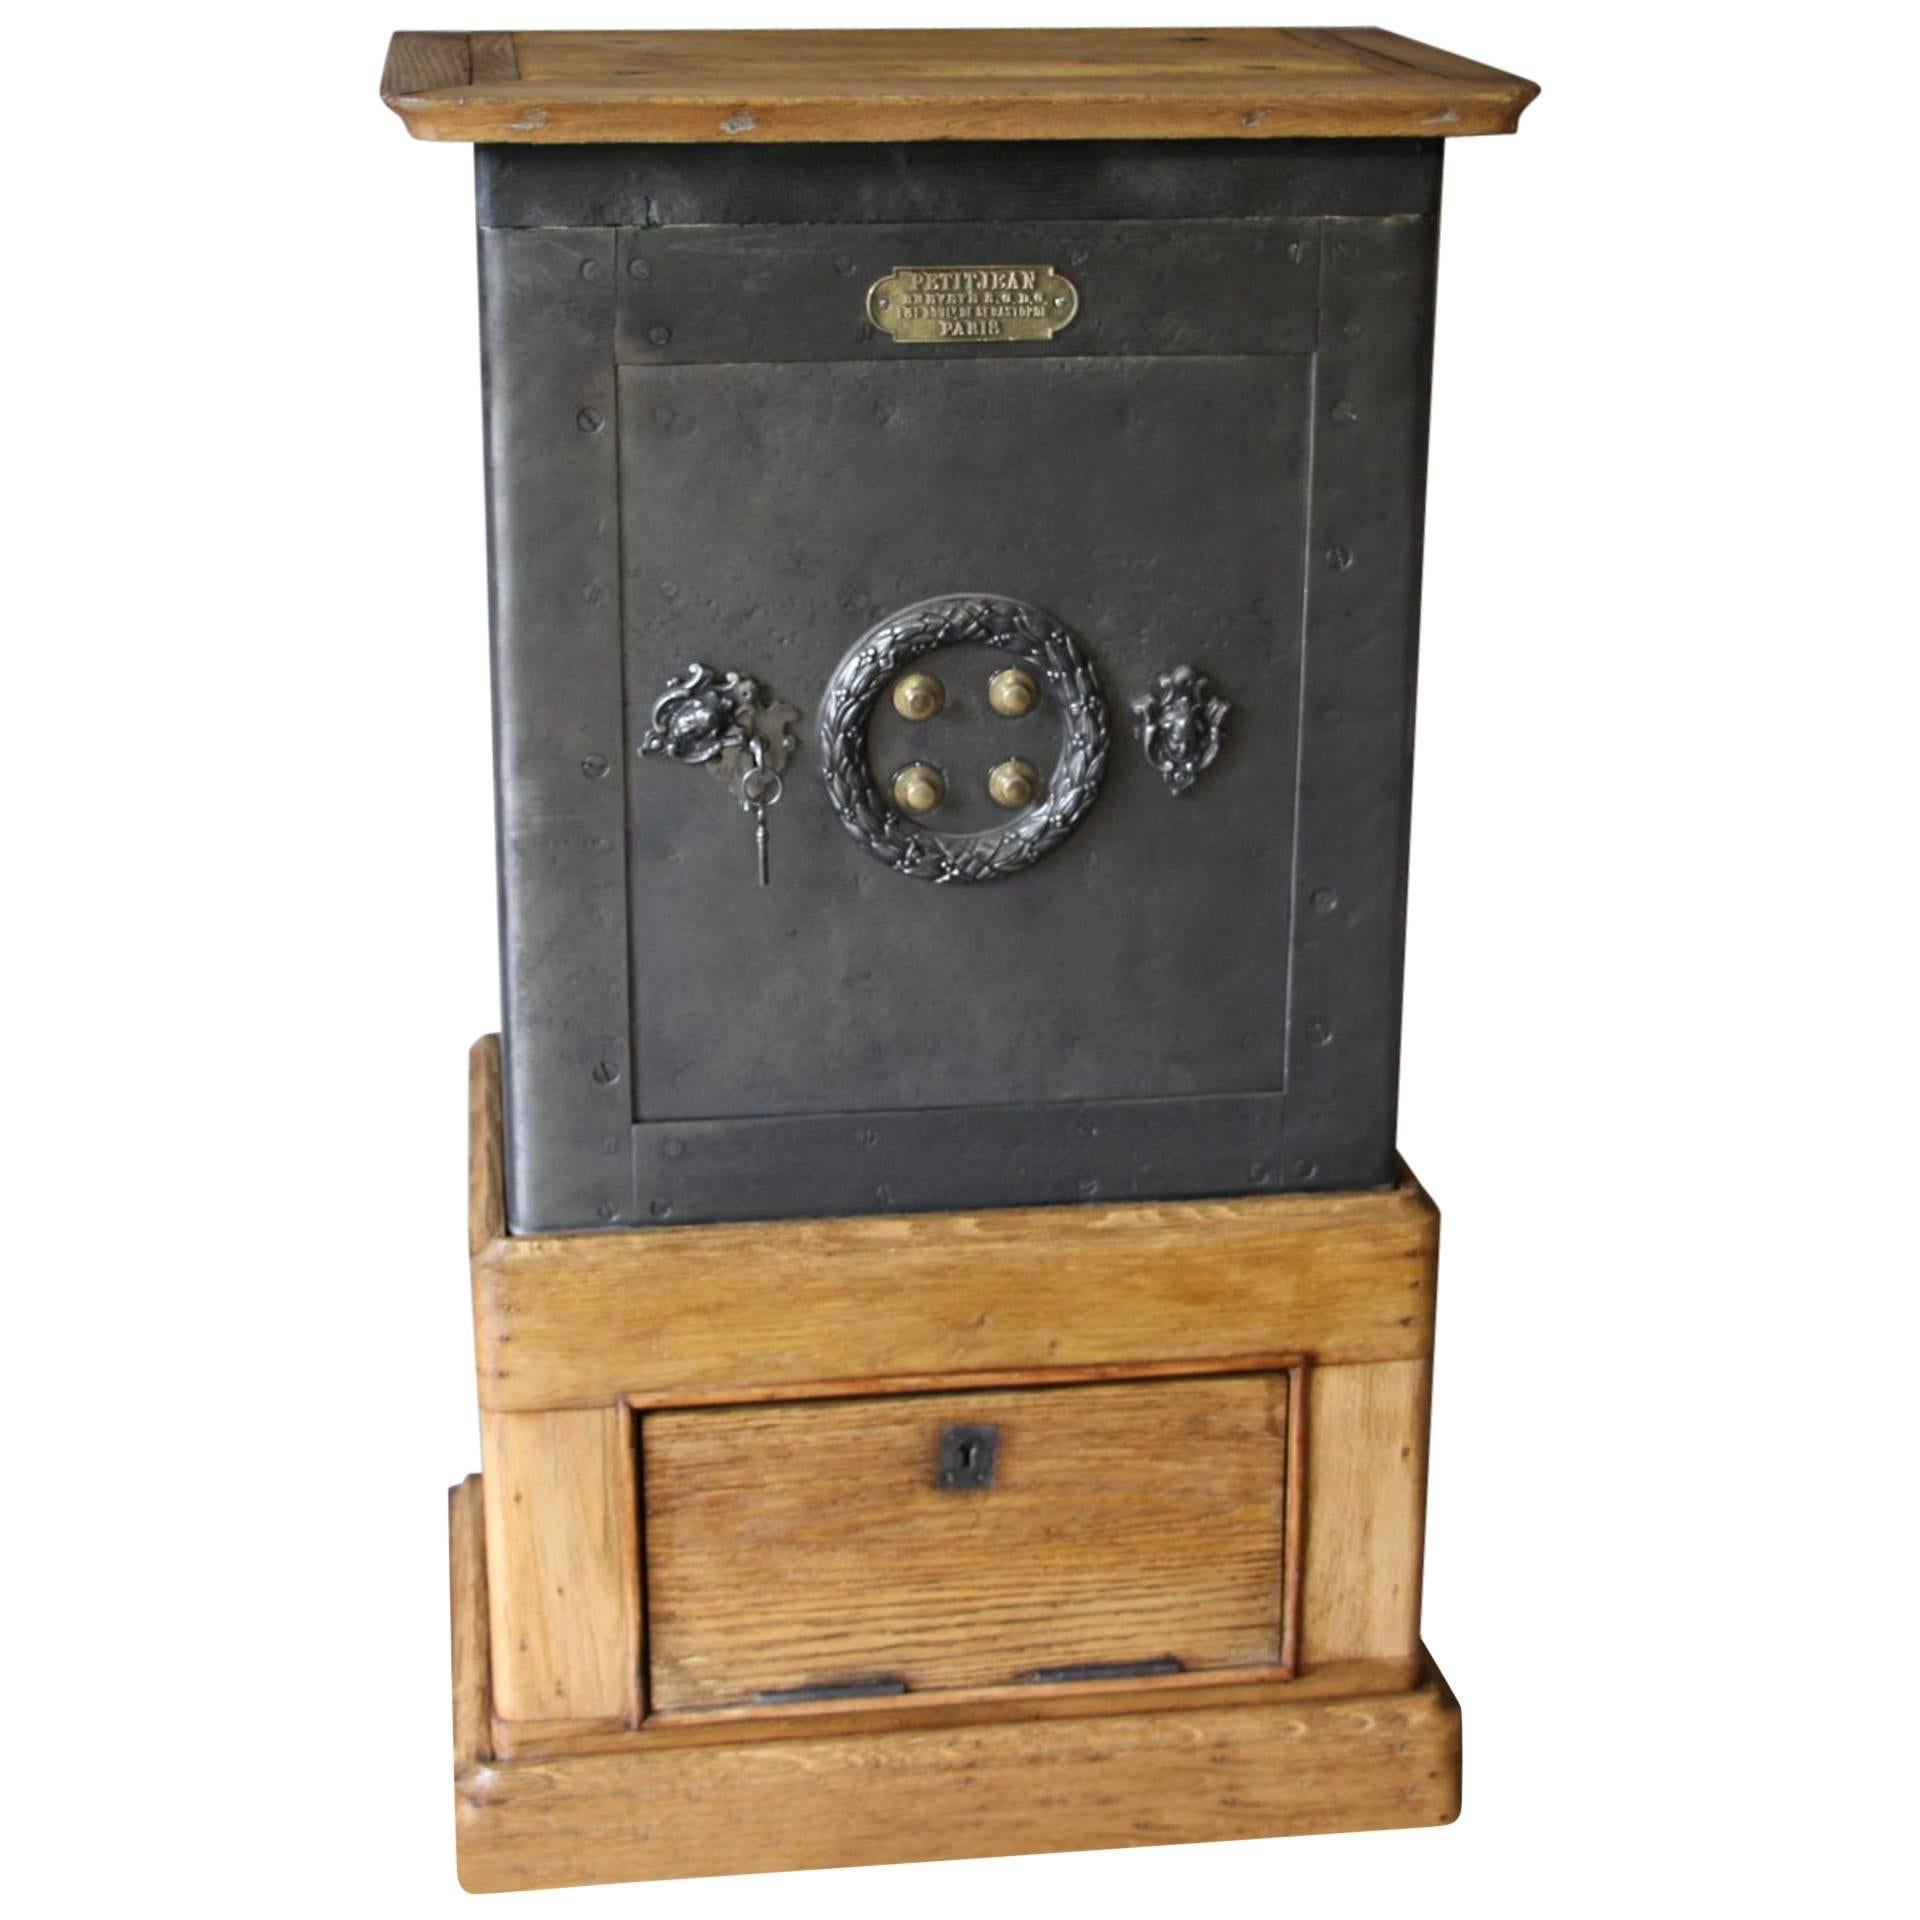 Black Steel, Iron and Wood Safe with All Keys and Working Combination by Petitje